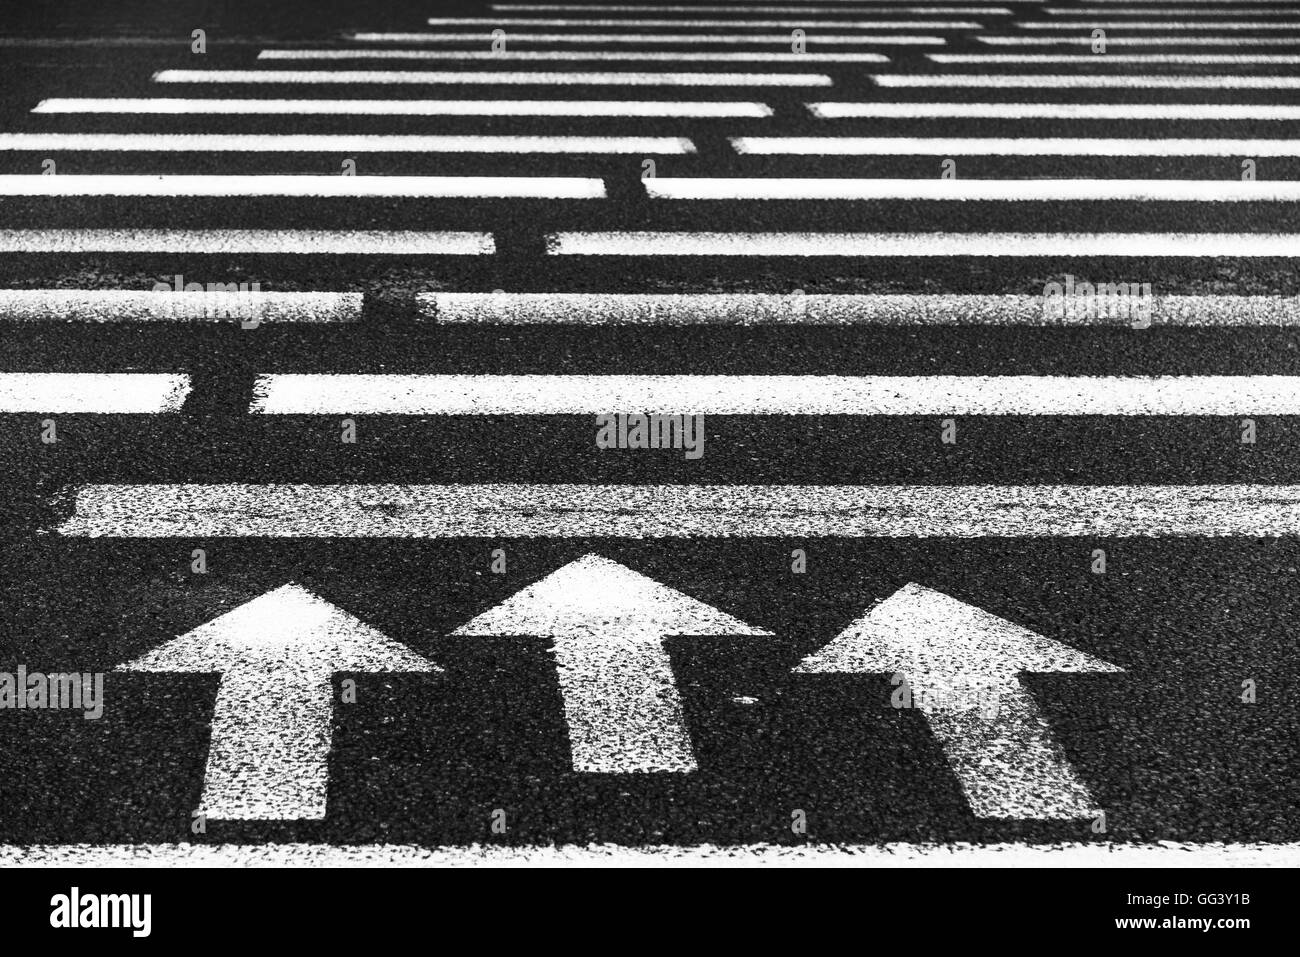 Pedestrian crossing with road marking: white arrows and rectangles on dark asphalt Stock Photo